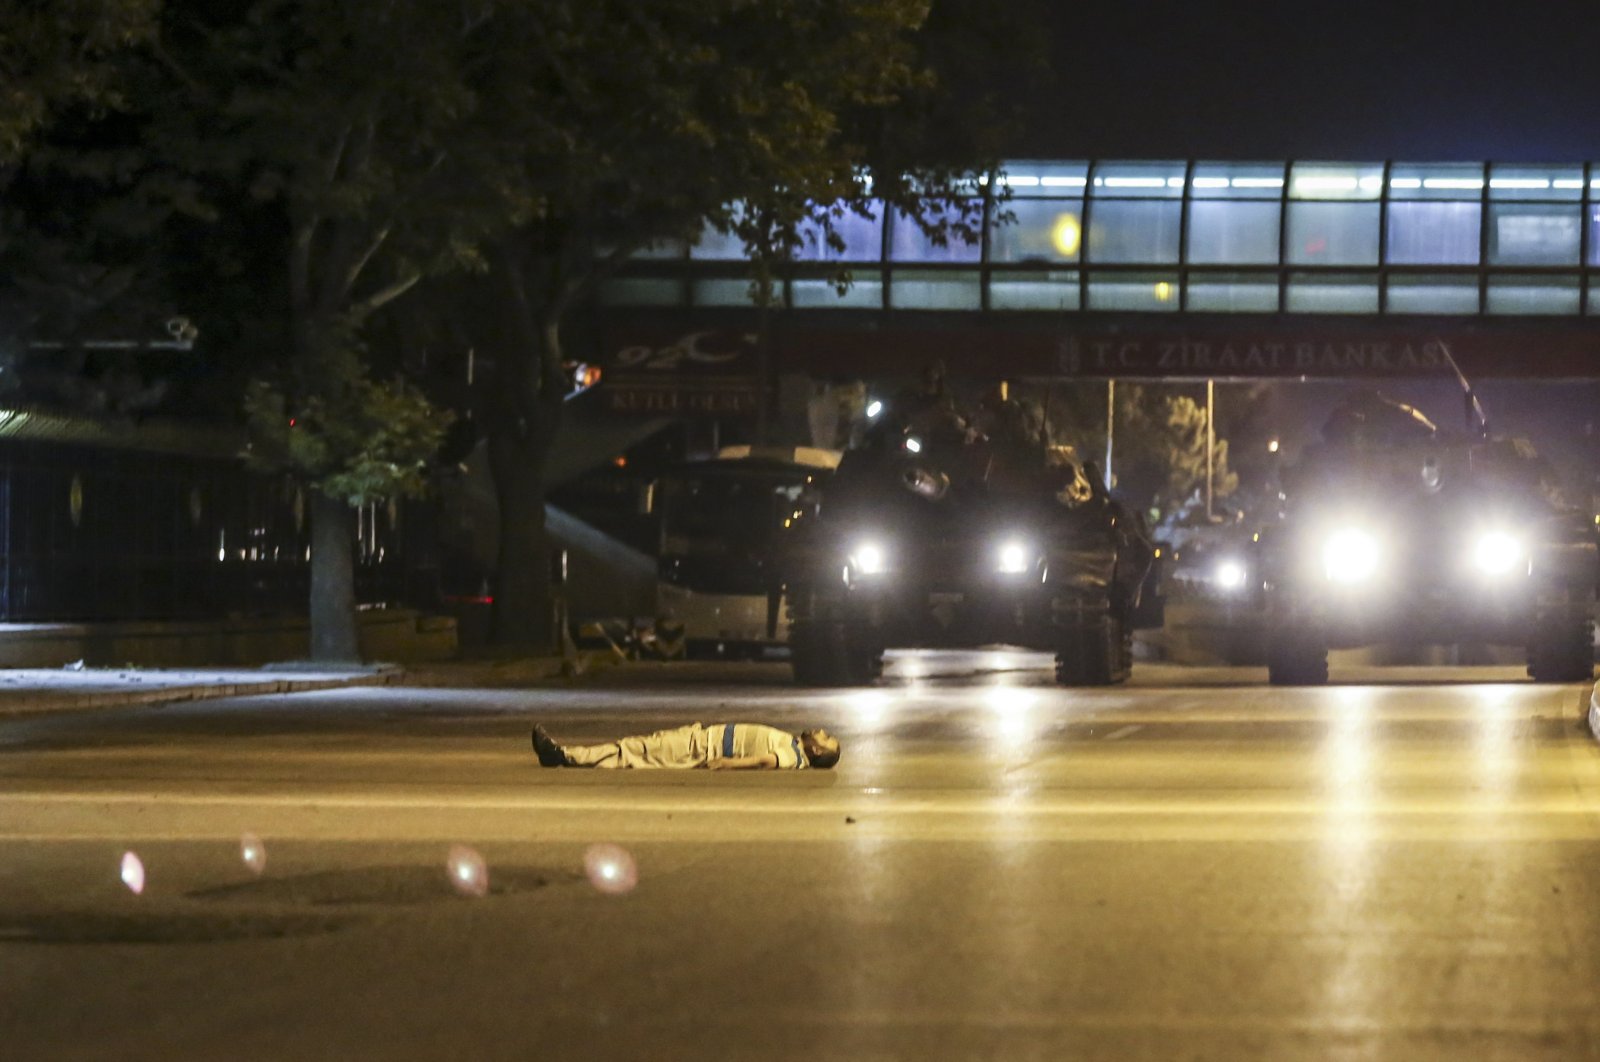 Yusuf Çelik lies on the road in front of approaching tanks on the night of the July 15 coup attempt, Istanbul, Turkey, July 15, 2016. (AA Photo)